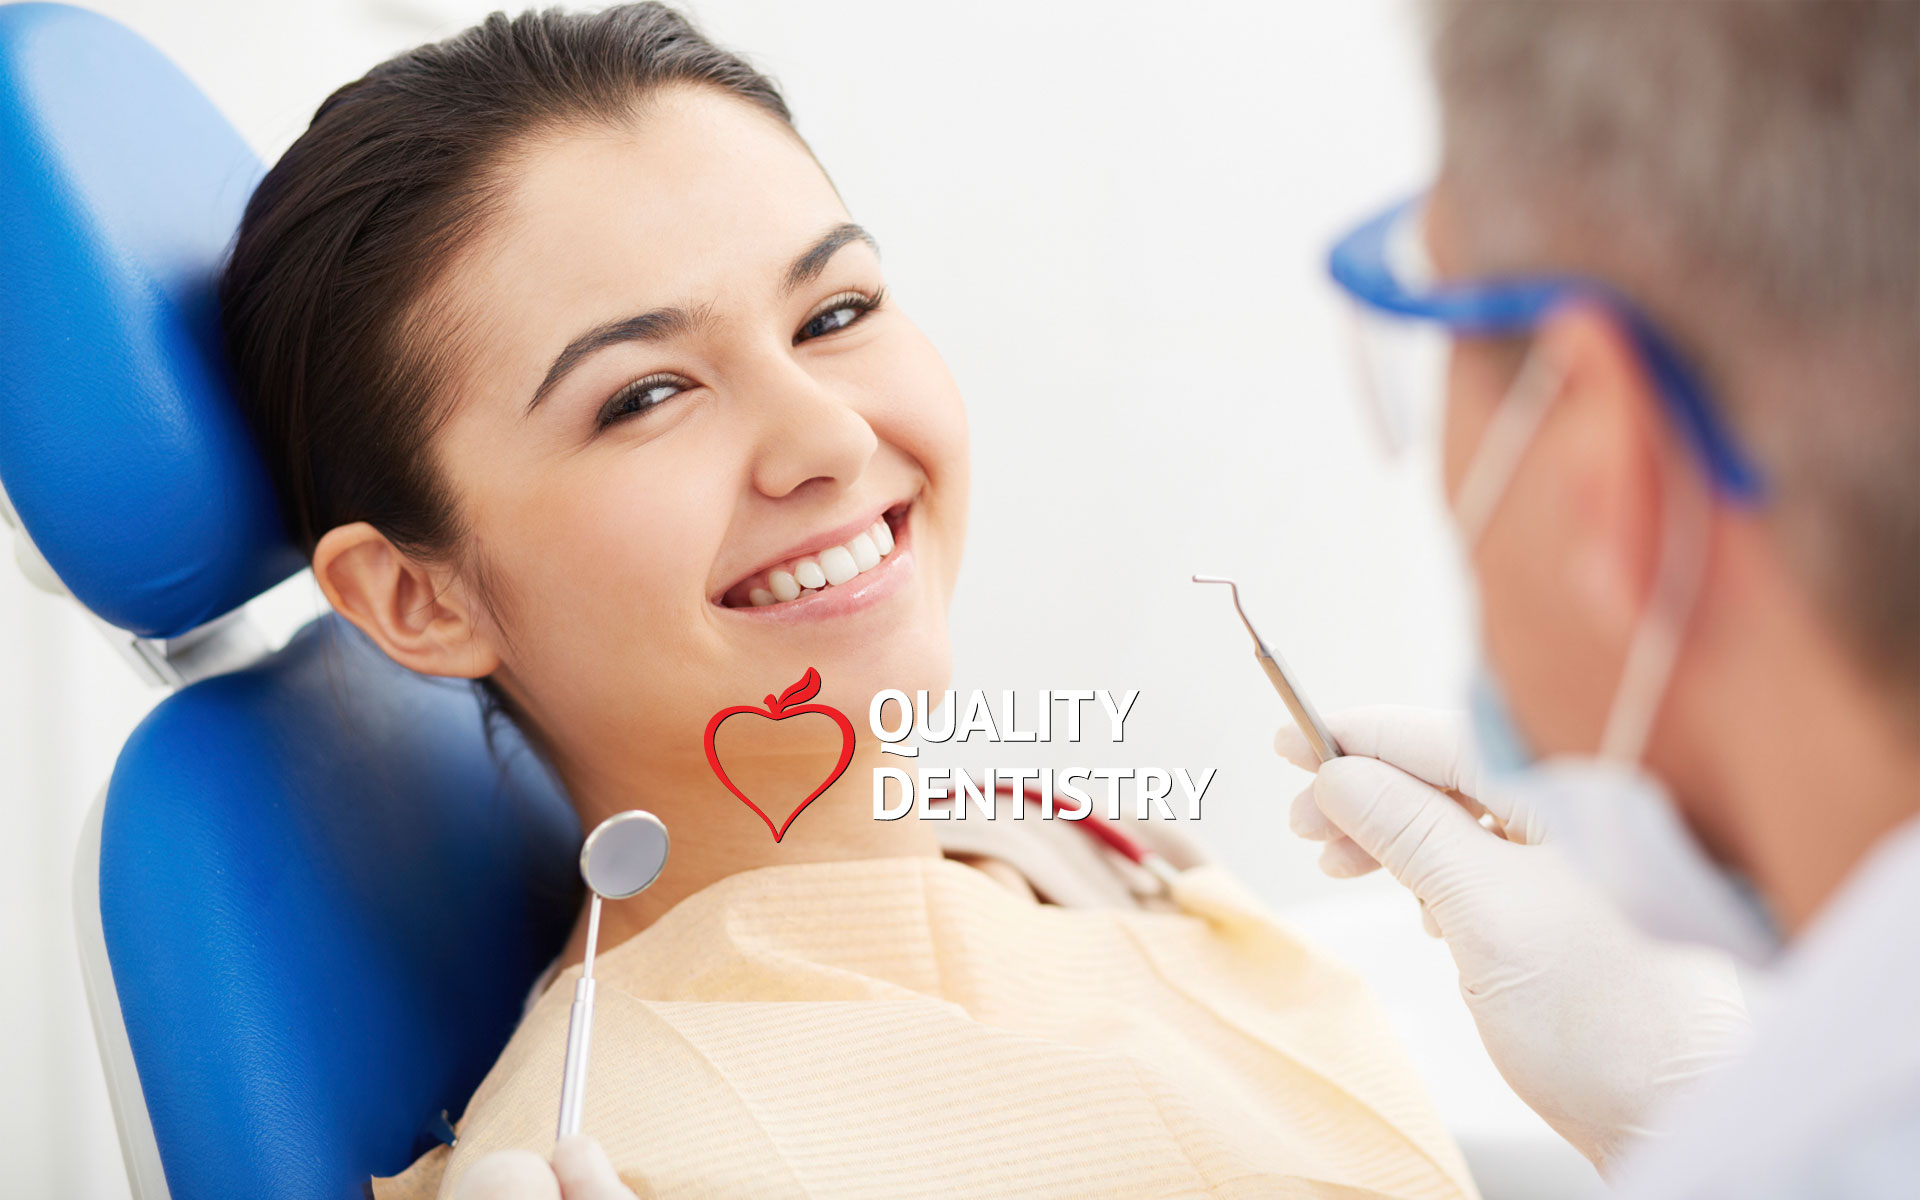 Quality Dentistry Downey - Your Downey Dentist